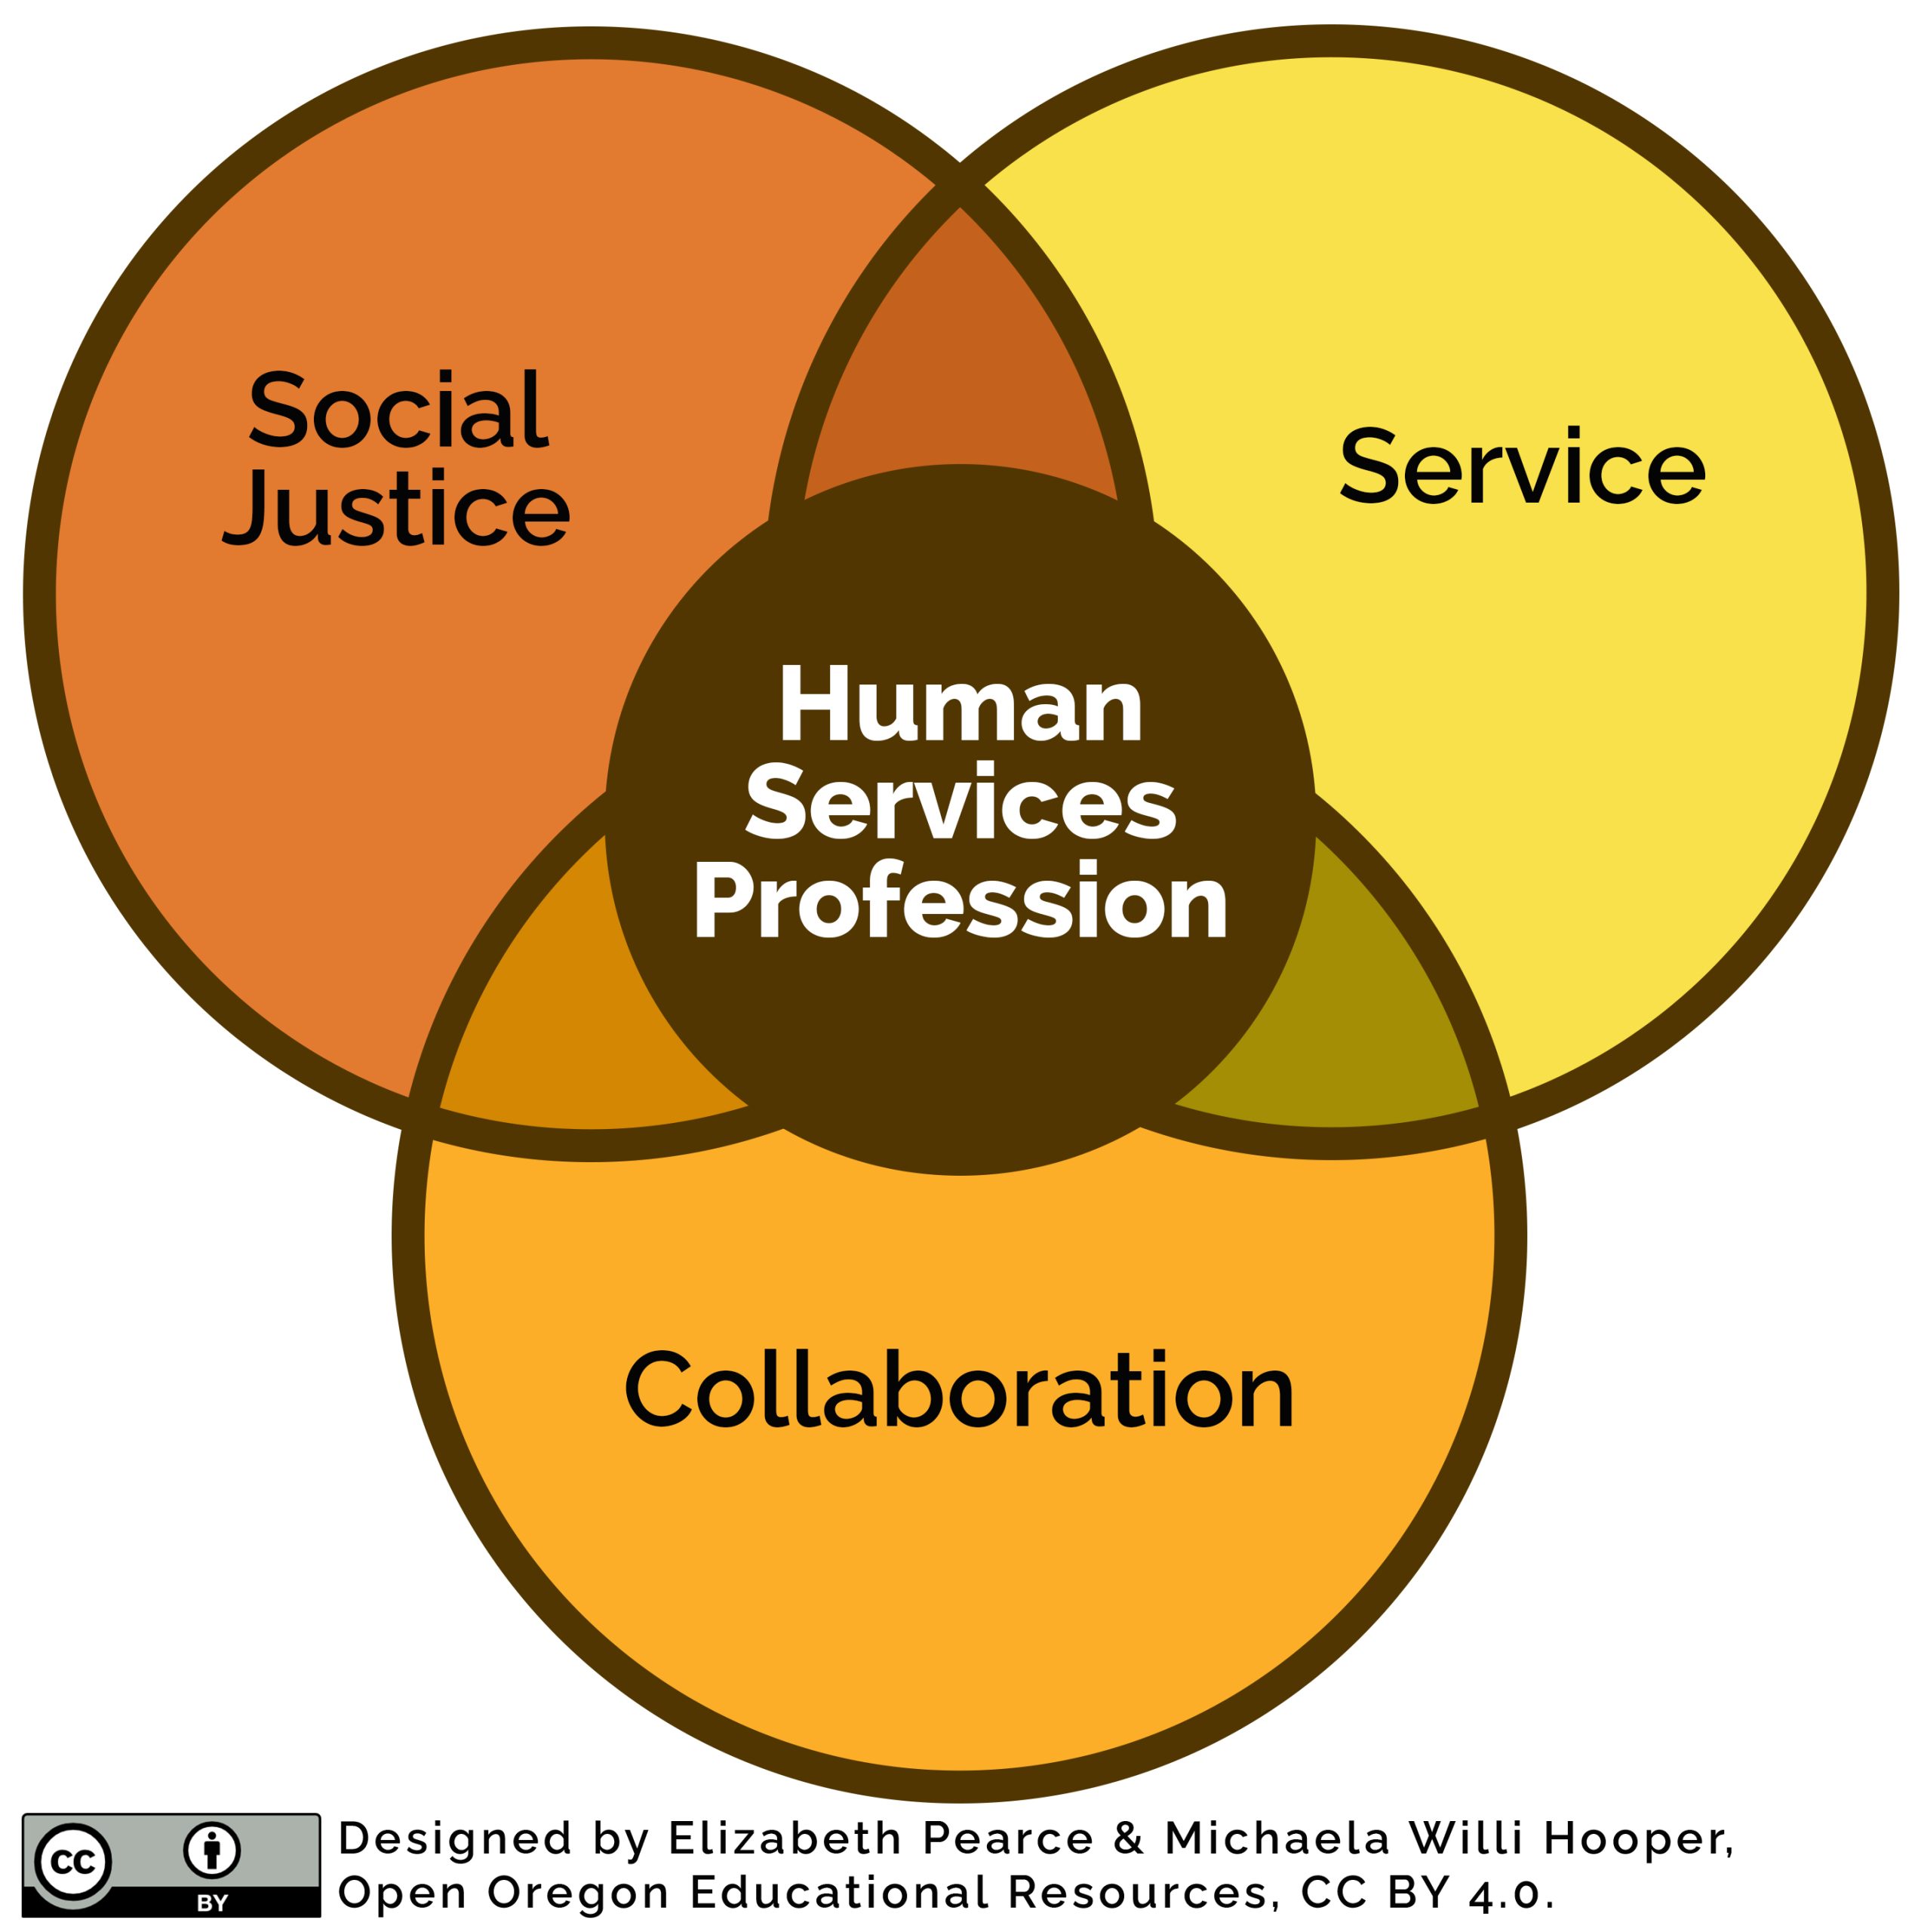 Three circles labeled Social Justice, Service, and Collaboration overlap. At the intersection is Human Services Profession.